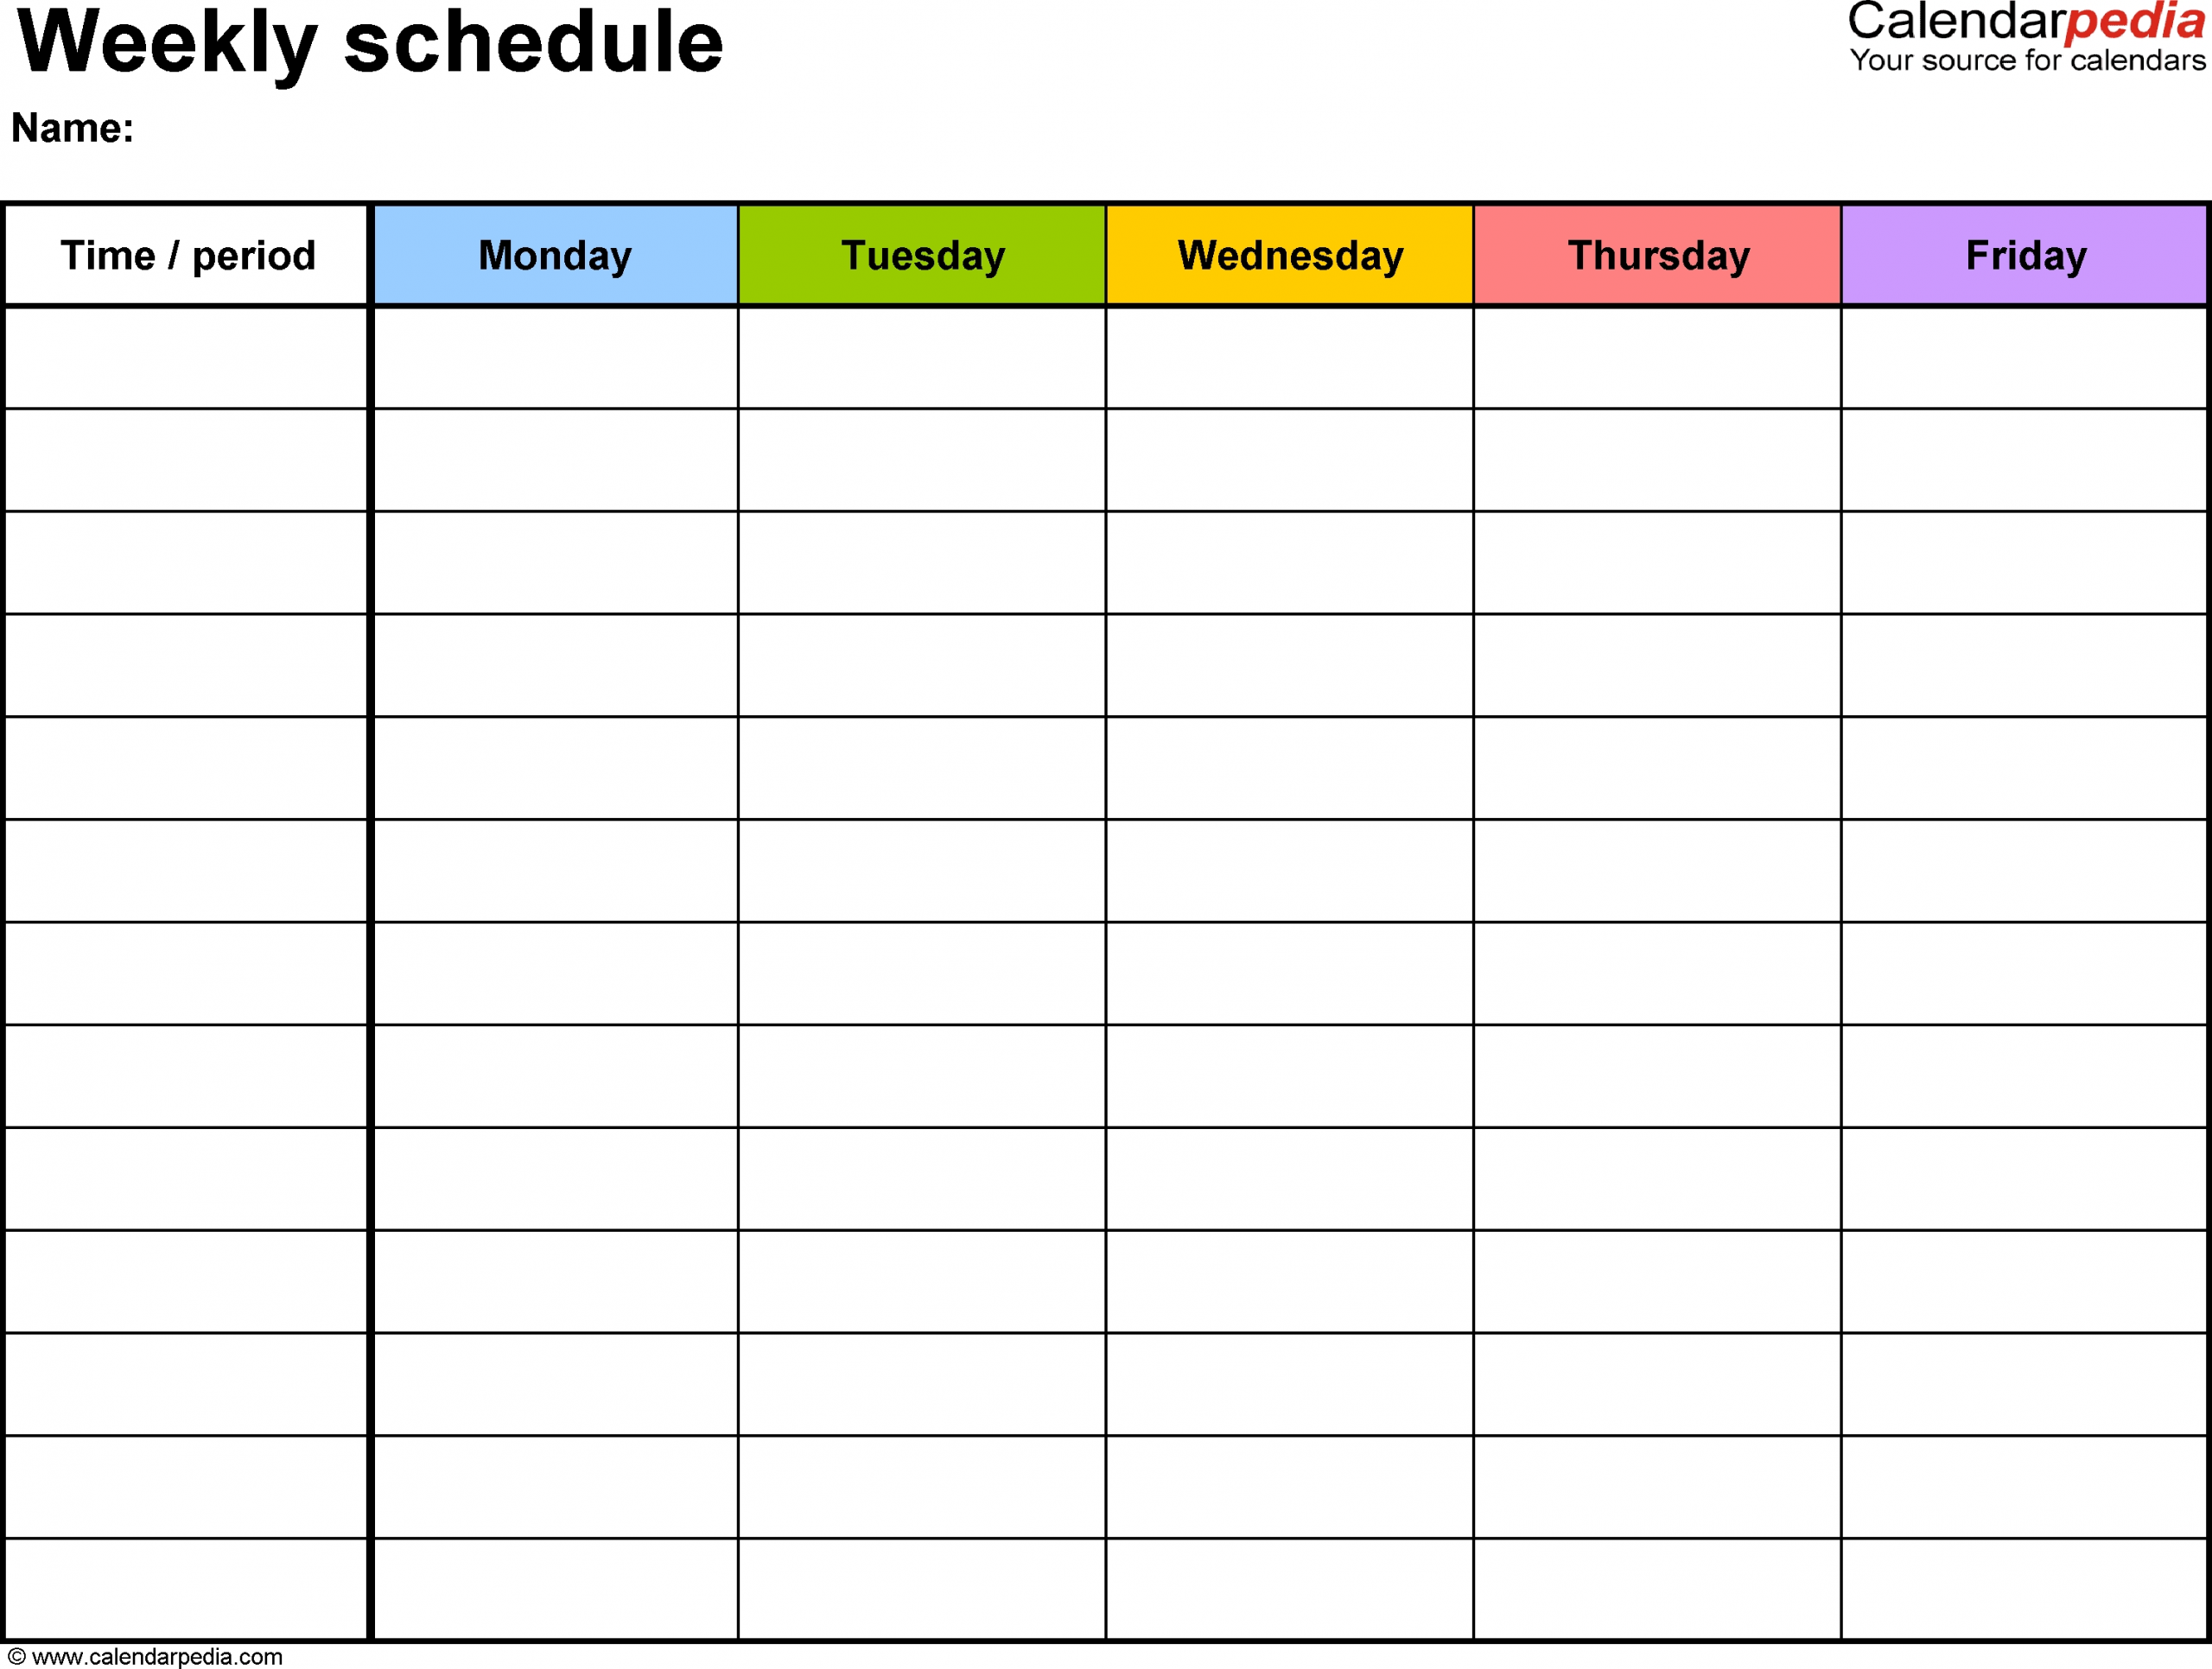 Free Weekly Schedule Templates For Word - 18 Templates pertaining to 7 Day Week Calendar Template